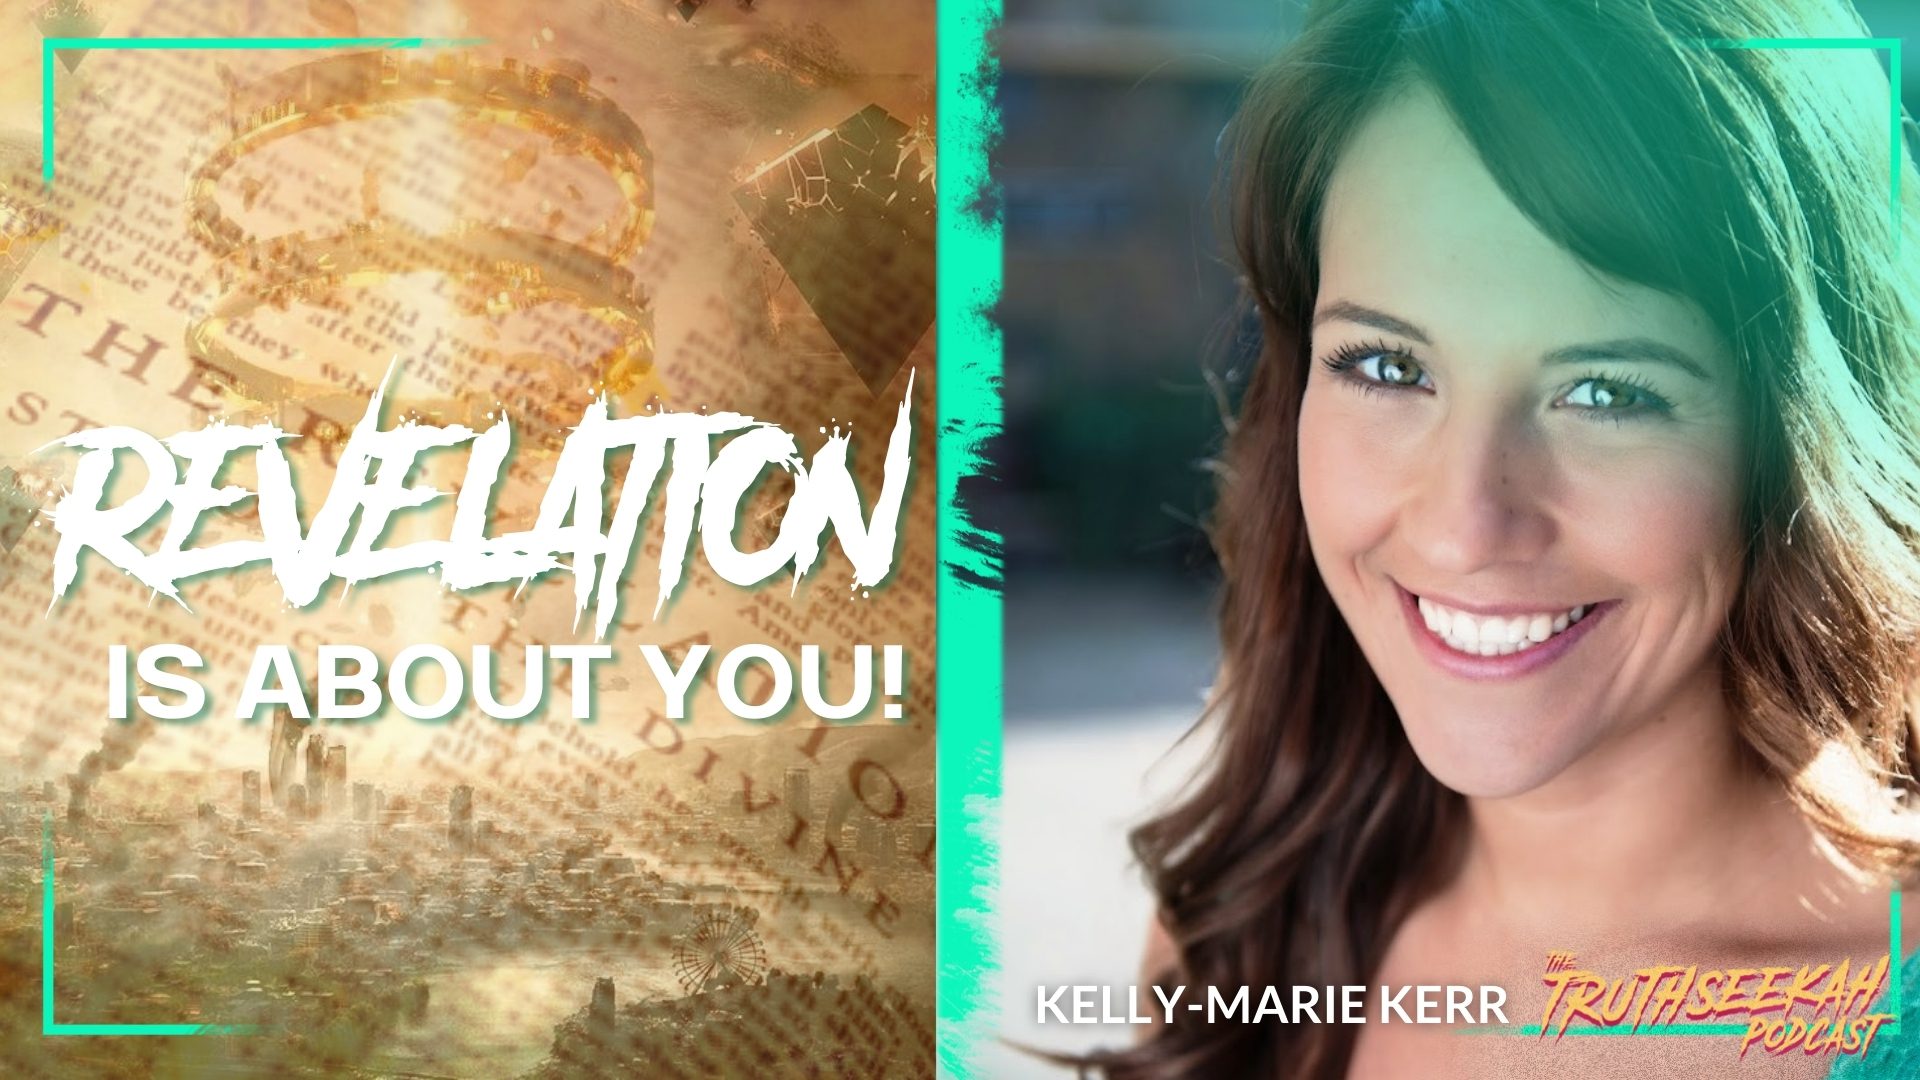 Kelly-Marie Kerr – The Book of Revelation is About You! – TruthSeekah Podcast